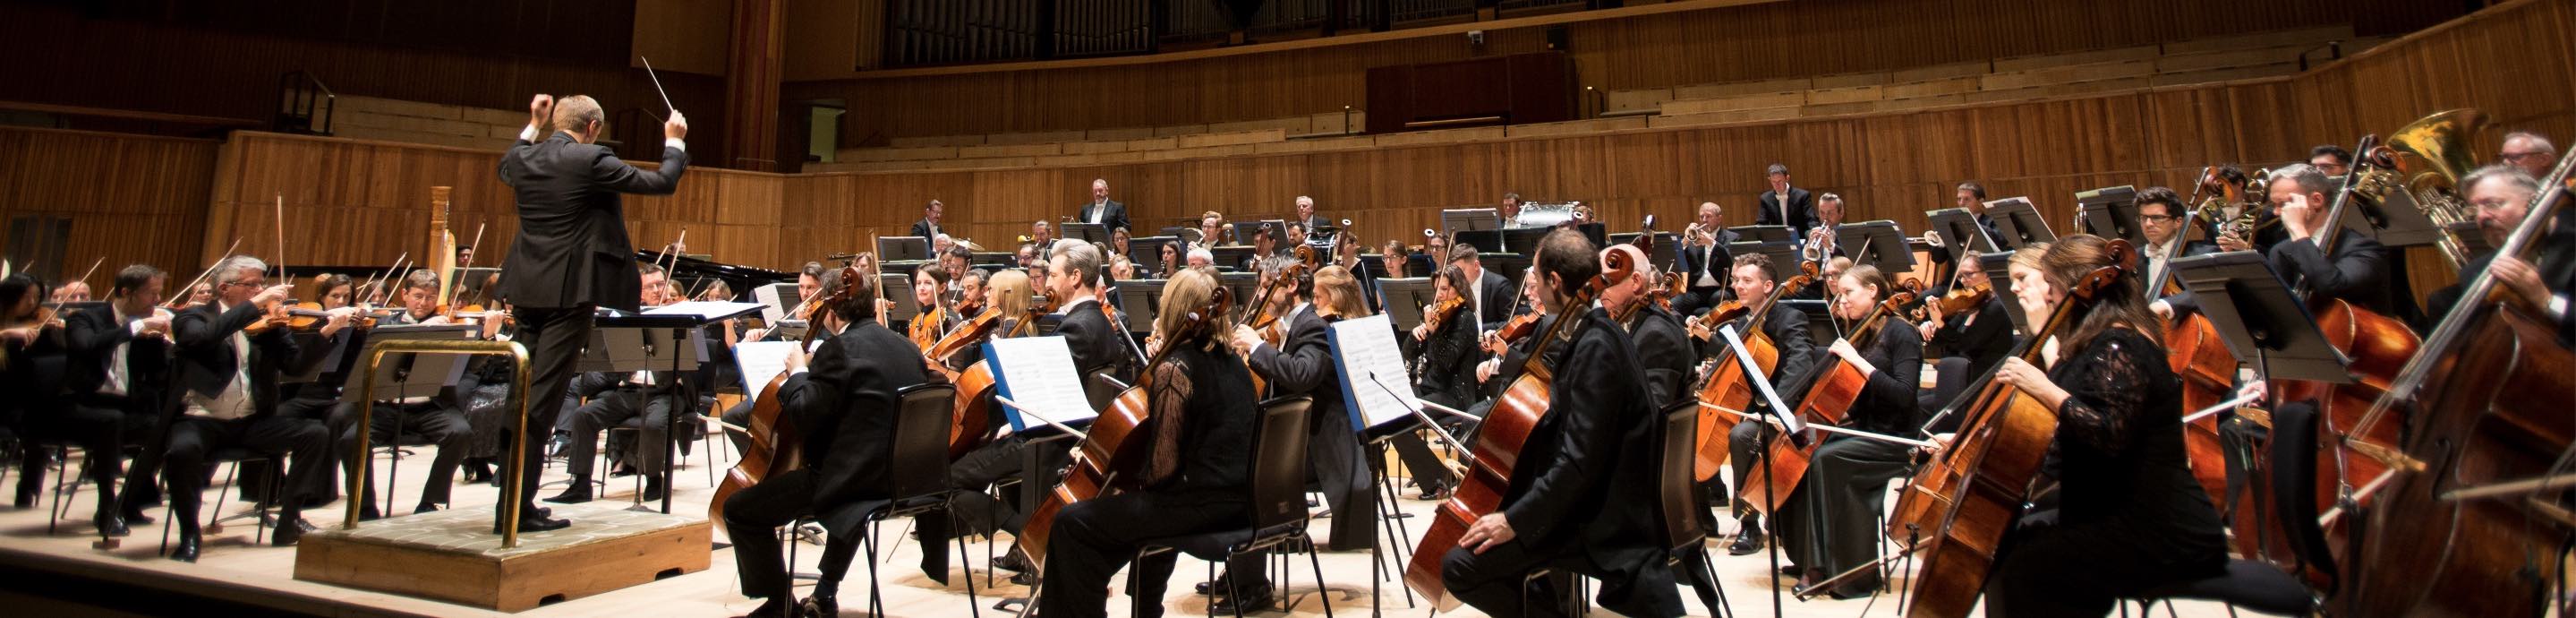 Royal Philharmonic Orchestra Partner Page